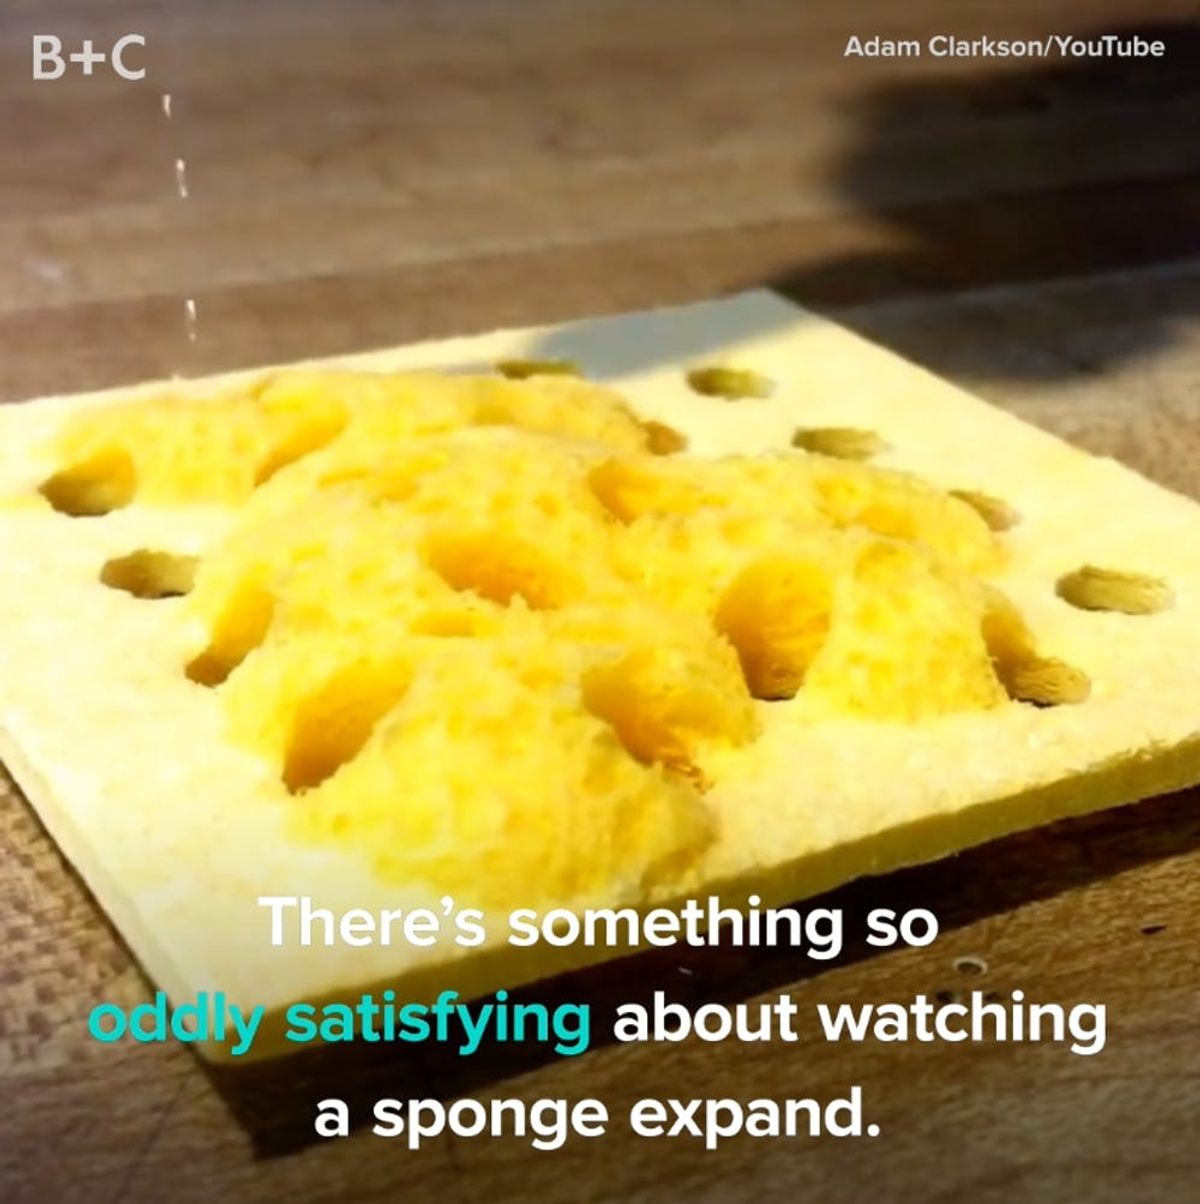 There’s Something SO Satisfying About Adding Water to a Sponge